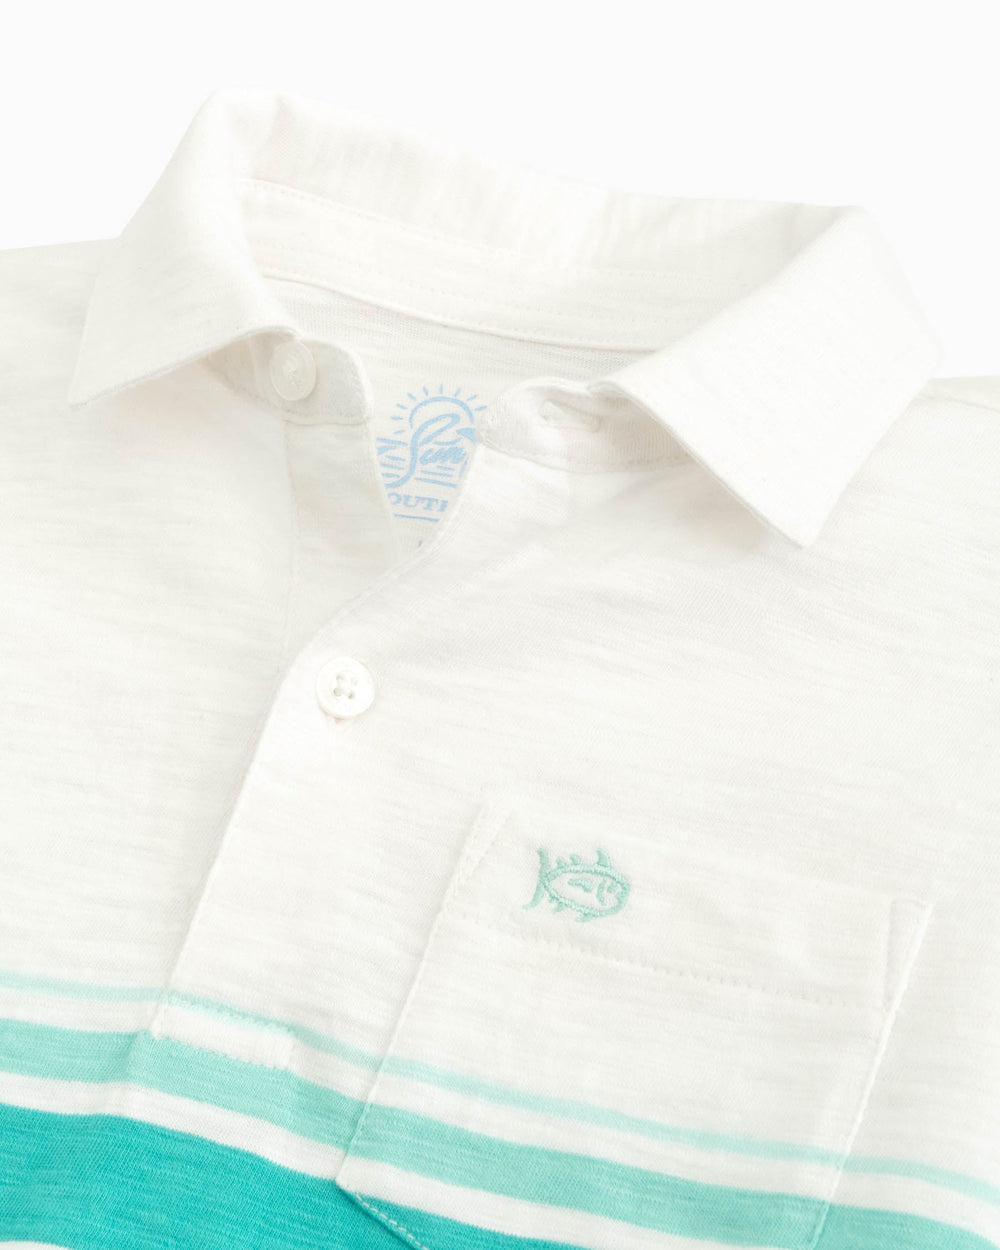 The detail view of the Southern Tide Youth Mesa Sun Farer Polo Shirt by Southern Tide - Classic White